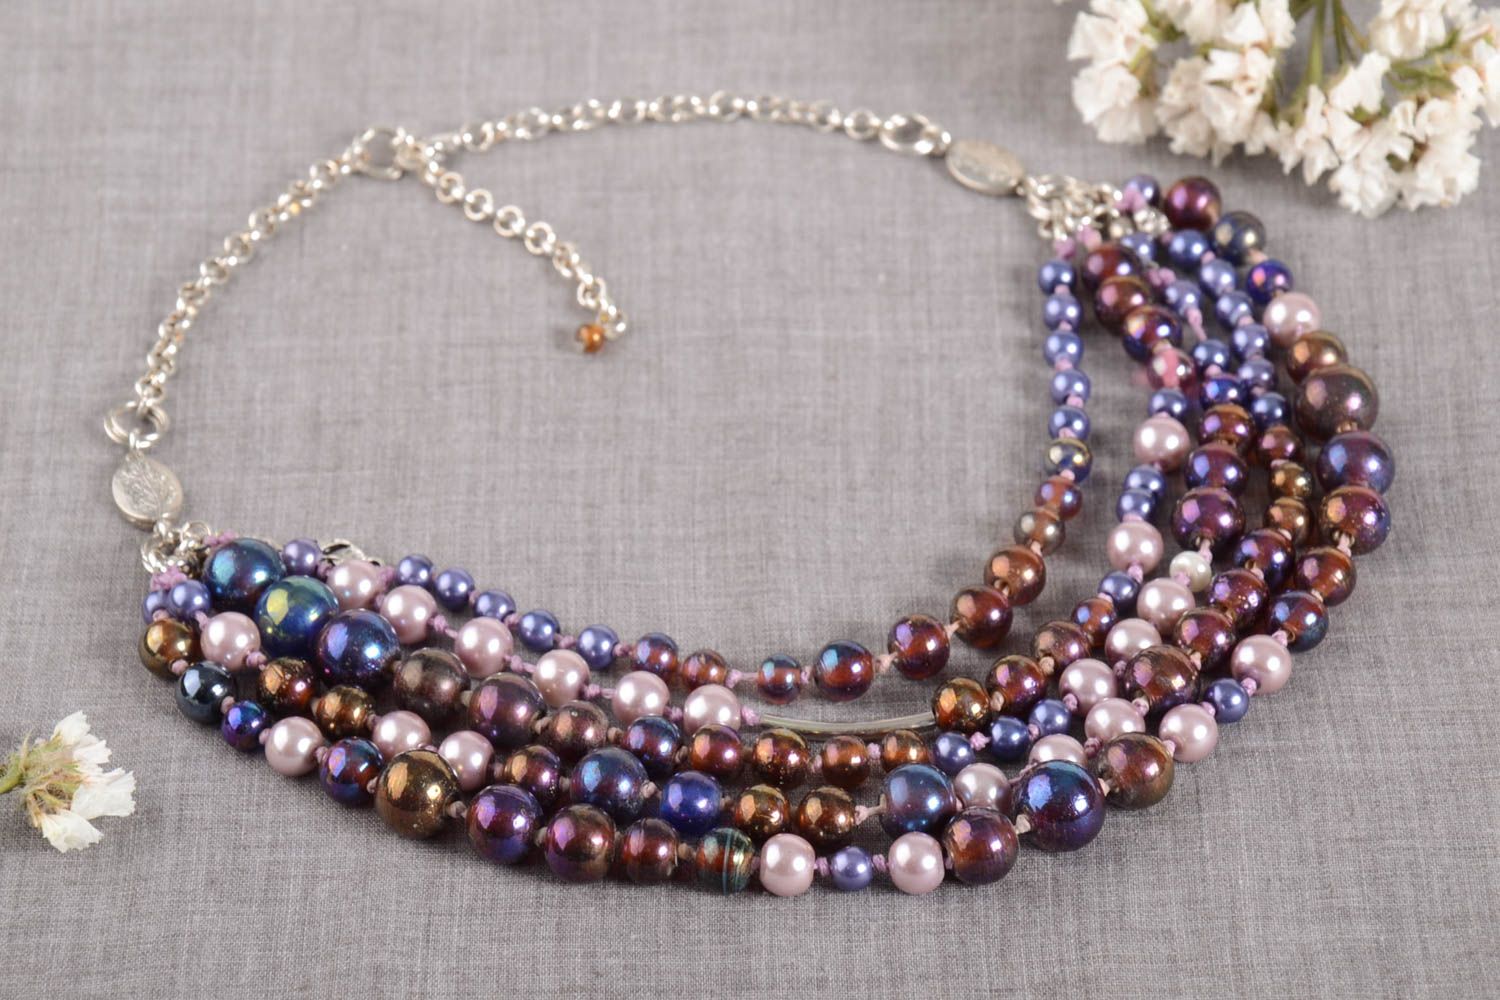 Handmade beaded necklace fashion accessories glass bead necklace fashion tips photo 1